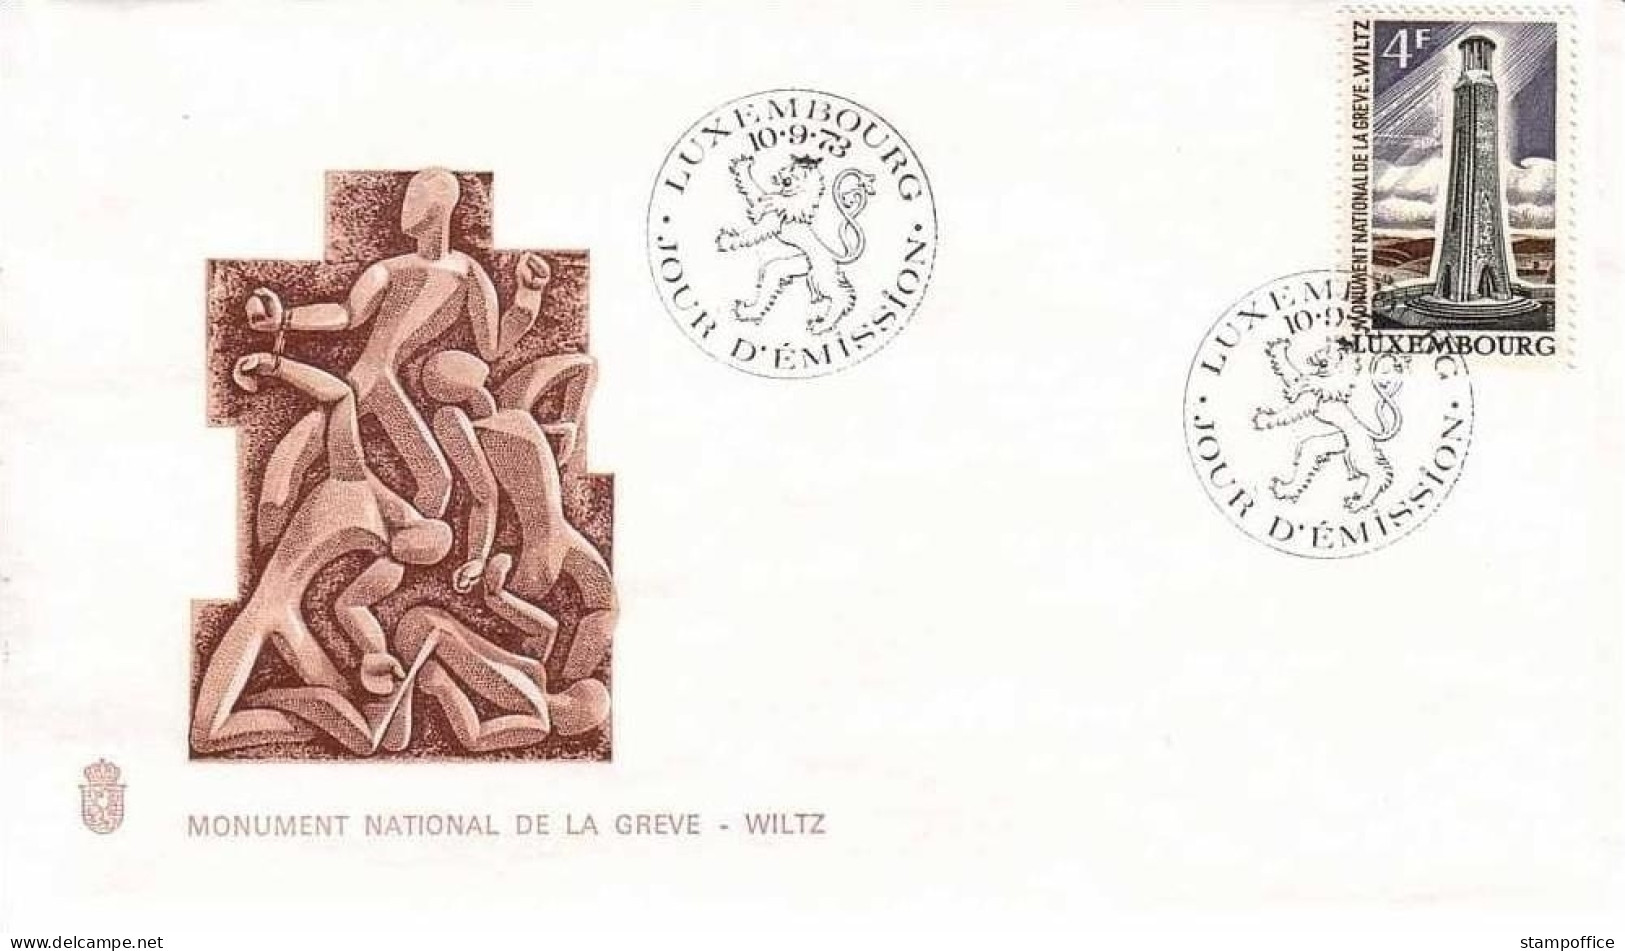 LUXEMBOURG MI-NR. 870 FDC NATIONALES STREIKDENKMAL - FDC